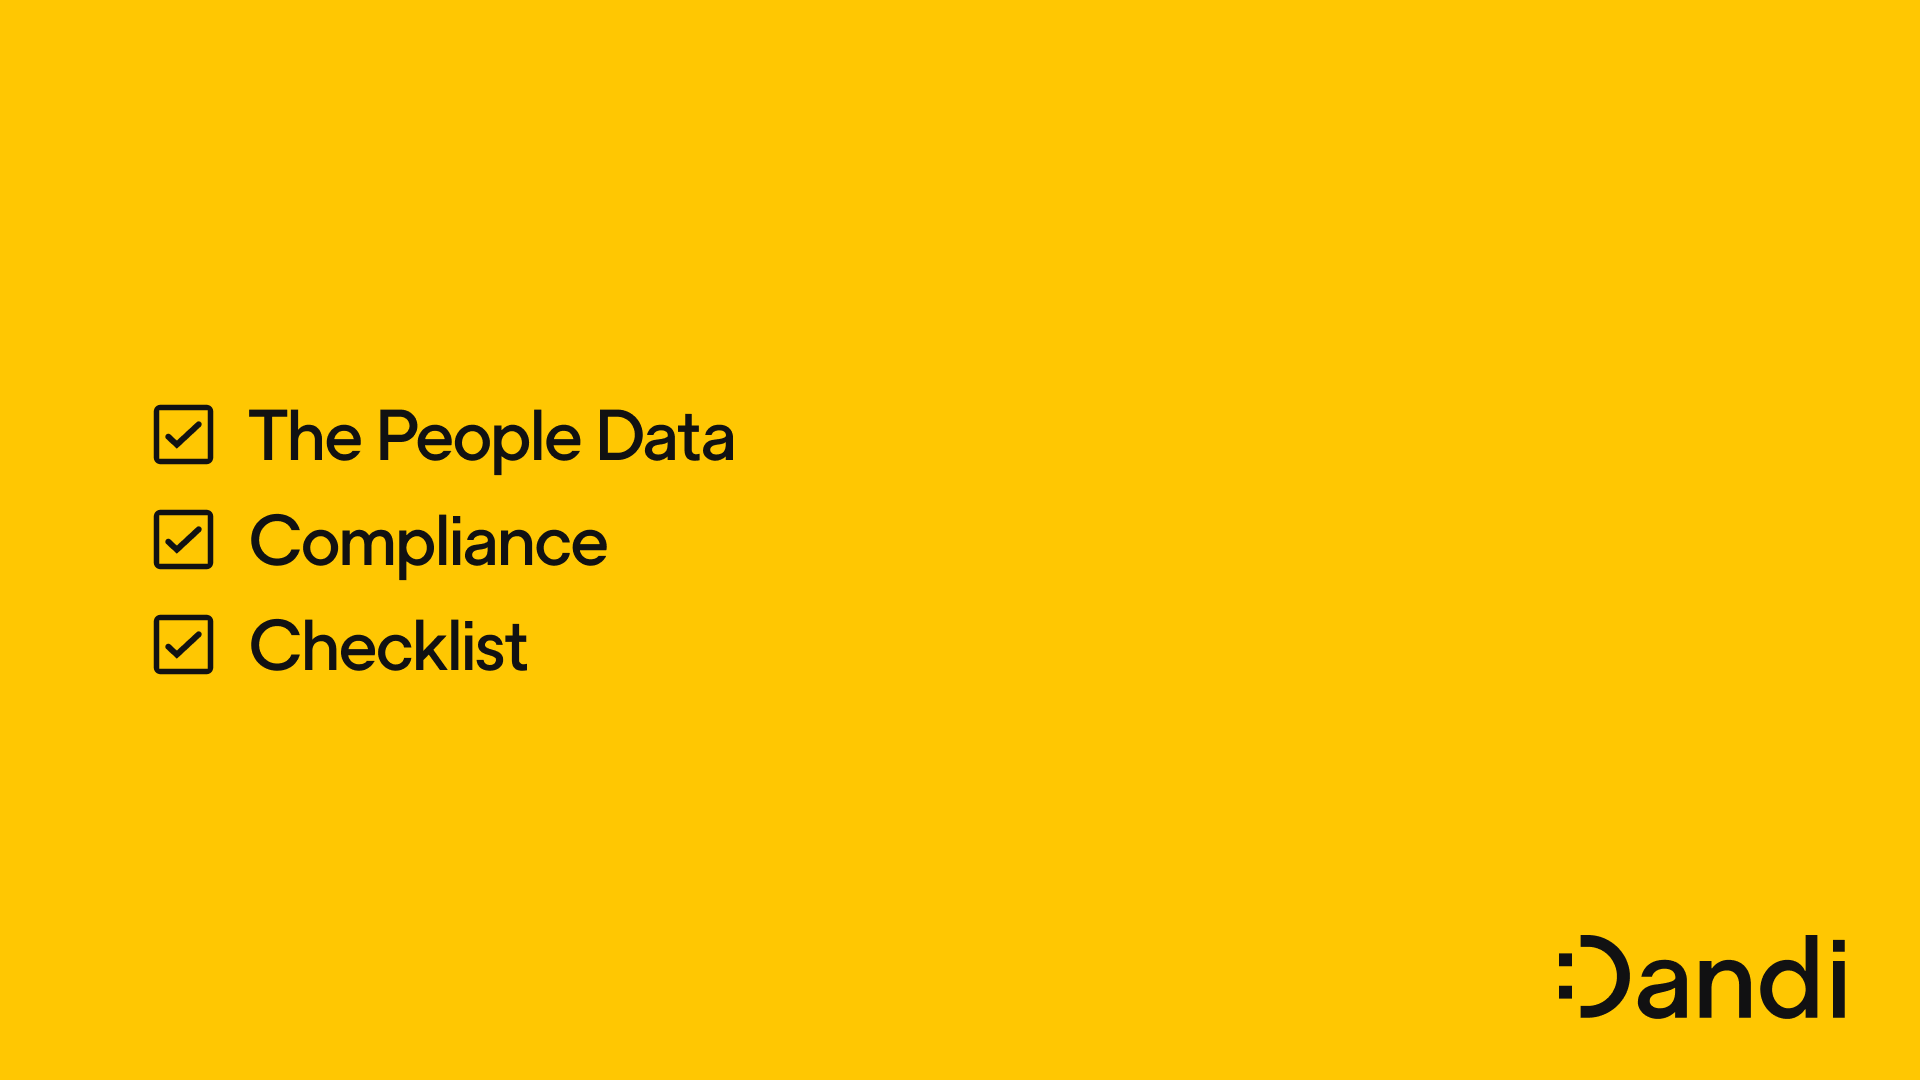 A three-row checklist reads "The People Data Compliance Checklist"